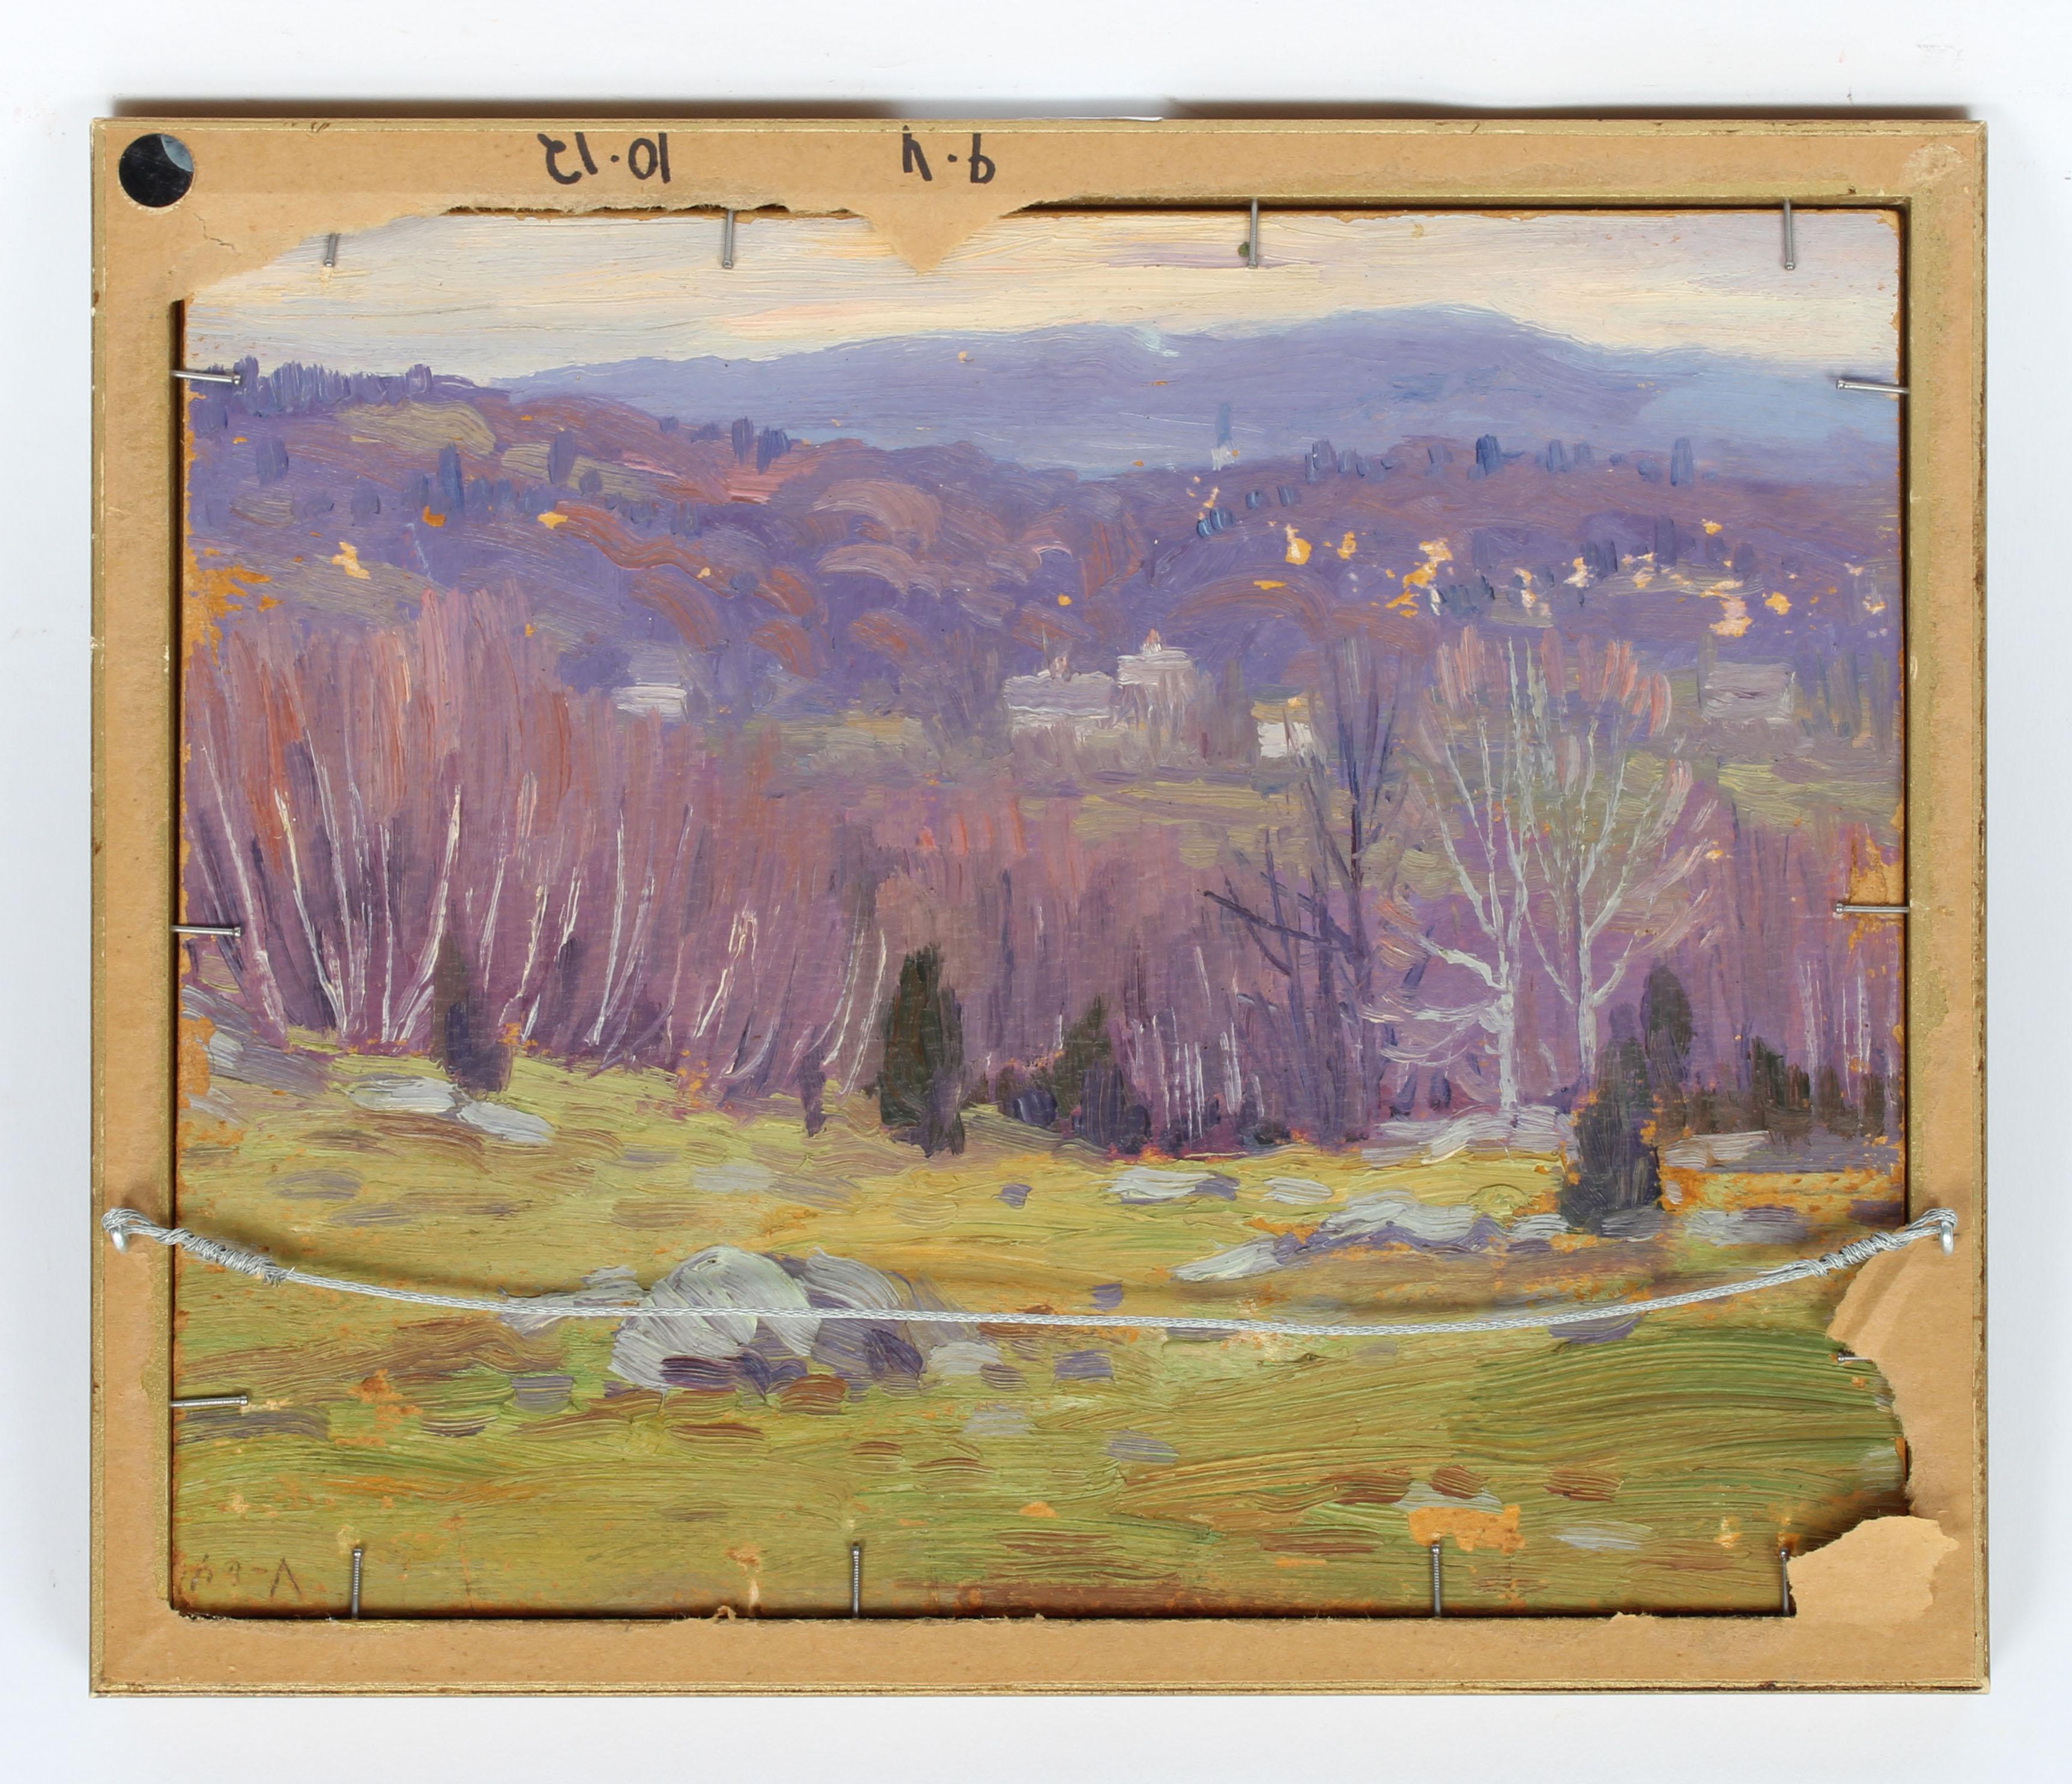 Antique American impressionist landscape oil painting by Charles Gordon Harris (1891 - 1963).  Oil on board, circa 1920. Signed.  Displayed in a period giltwood frame.  Image, 11